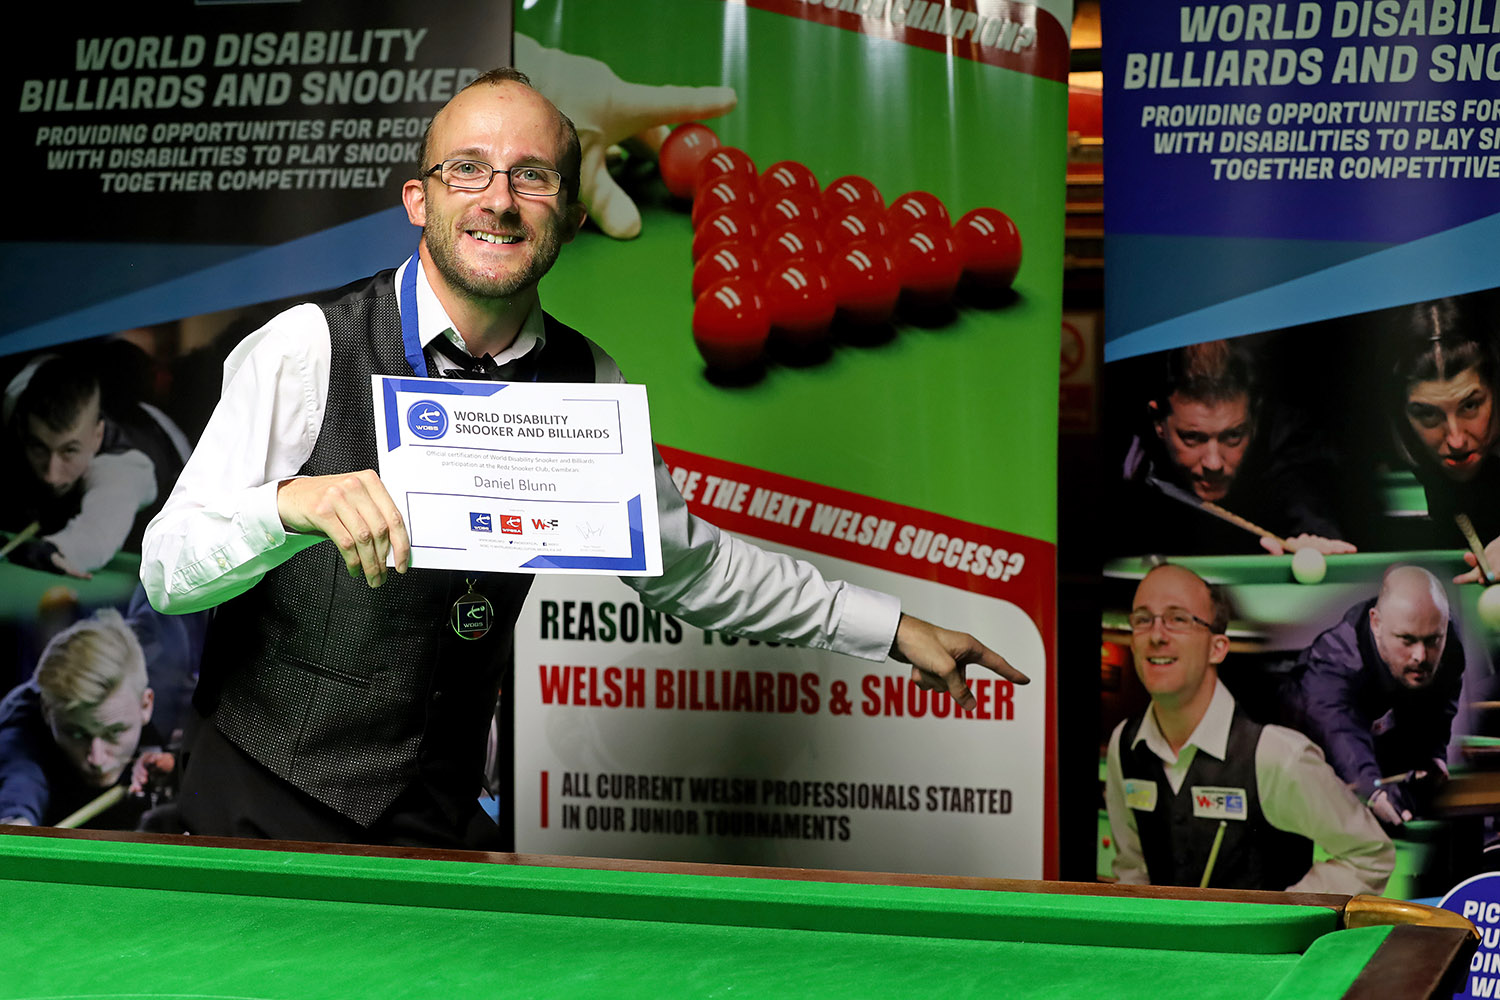 Daniel Blunn smiling and pointing to his own image on tournament banner